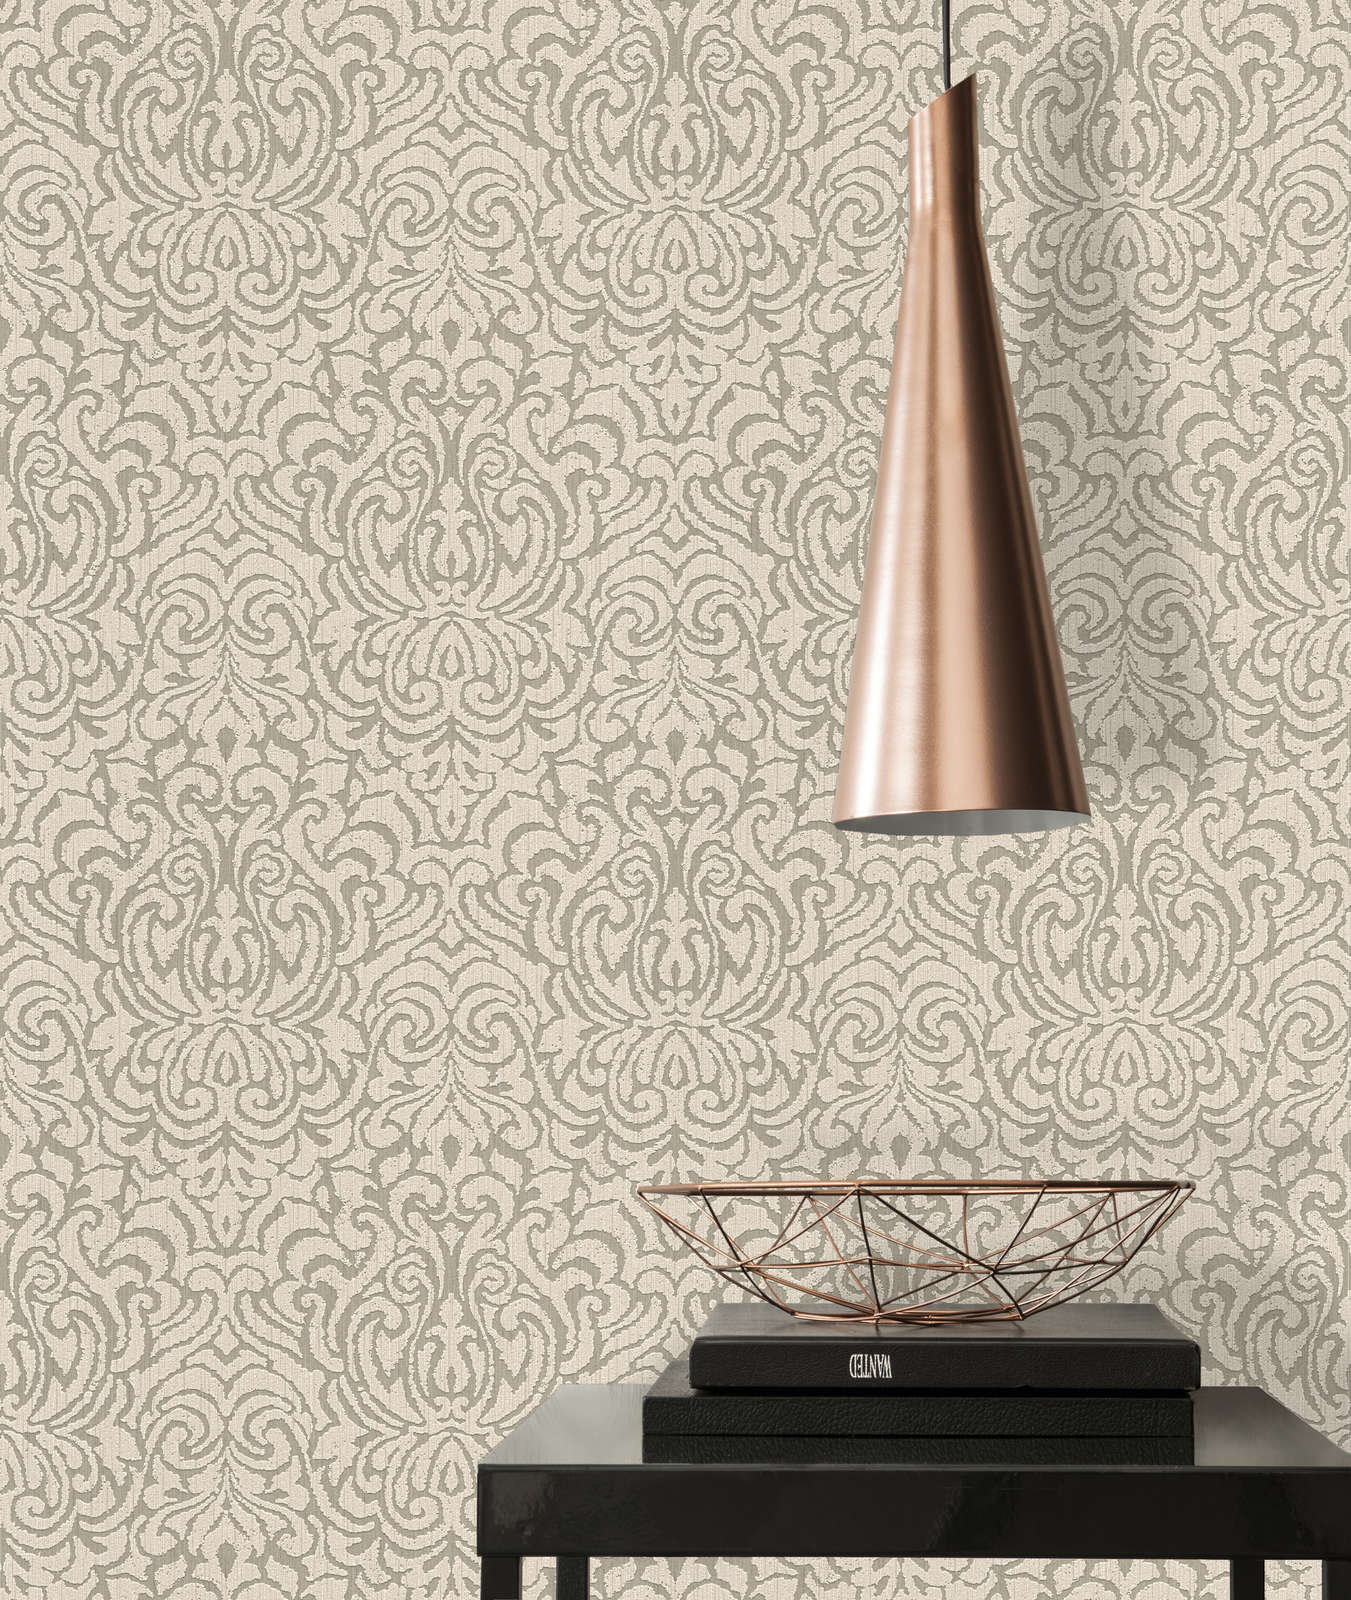             wallpaper ornaments in used look with texture effect - beige, brown
        